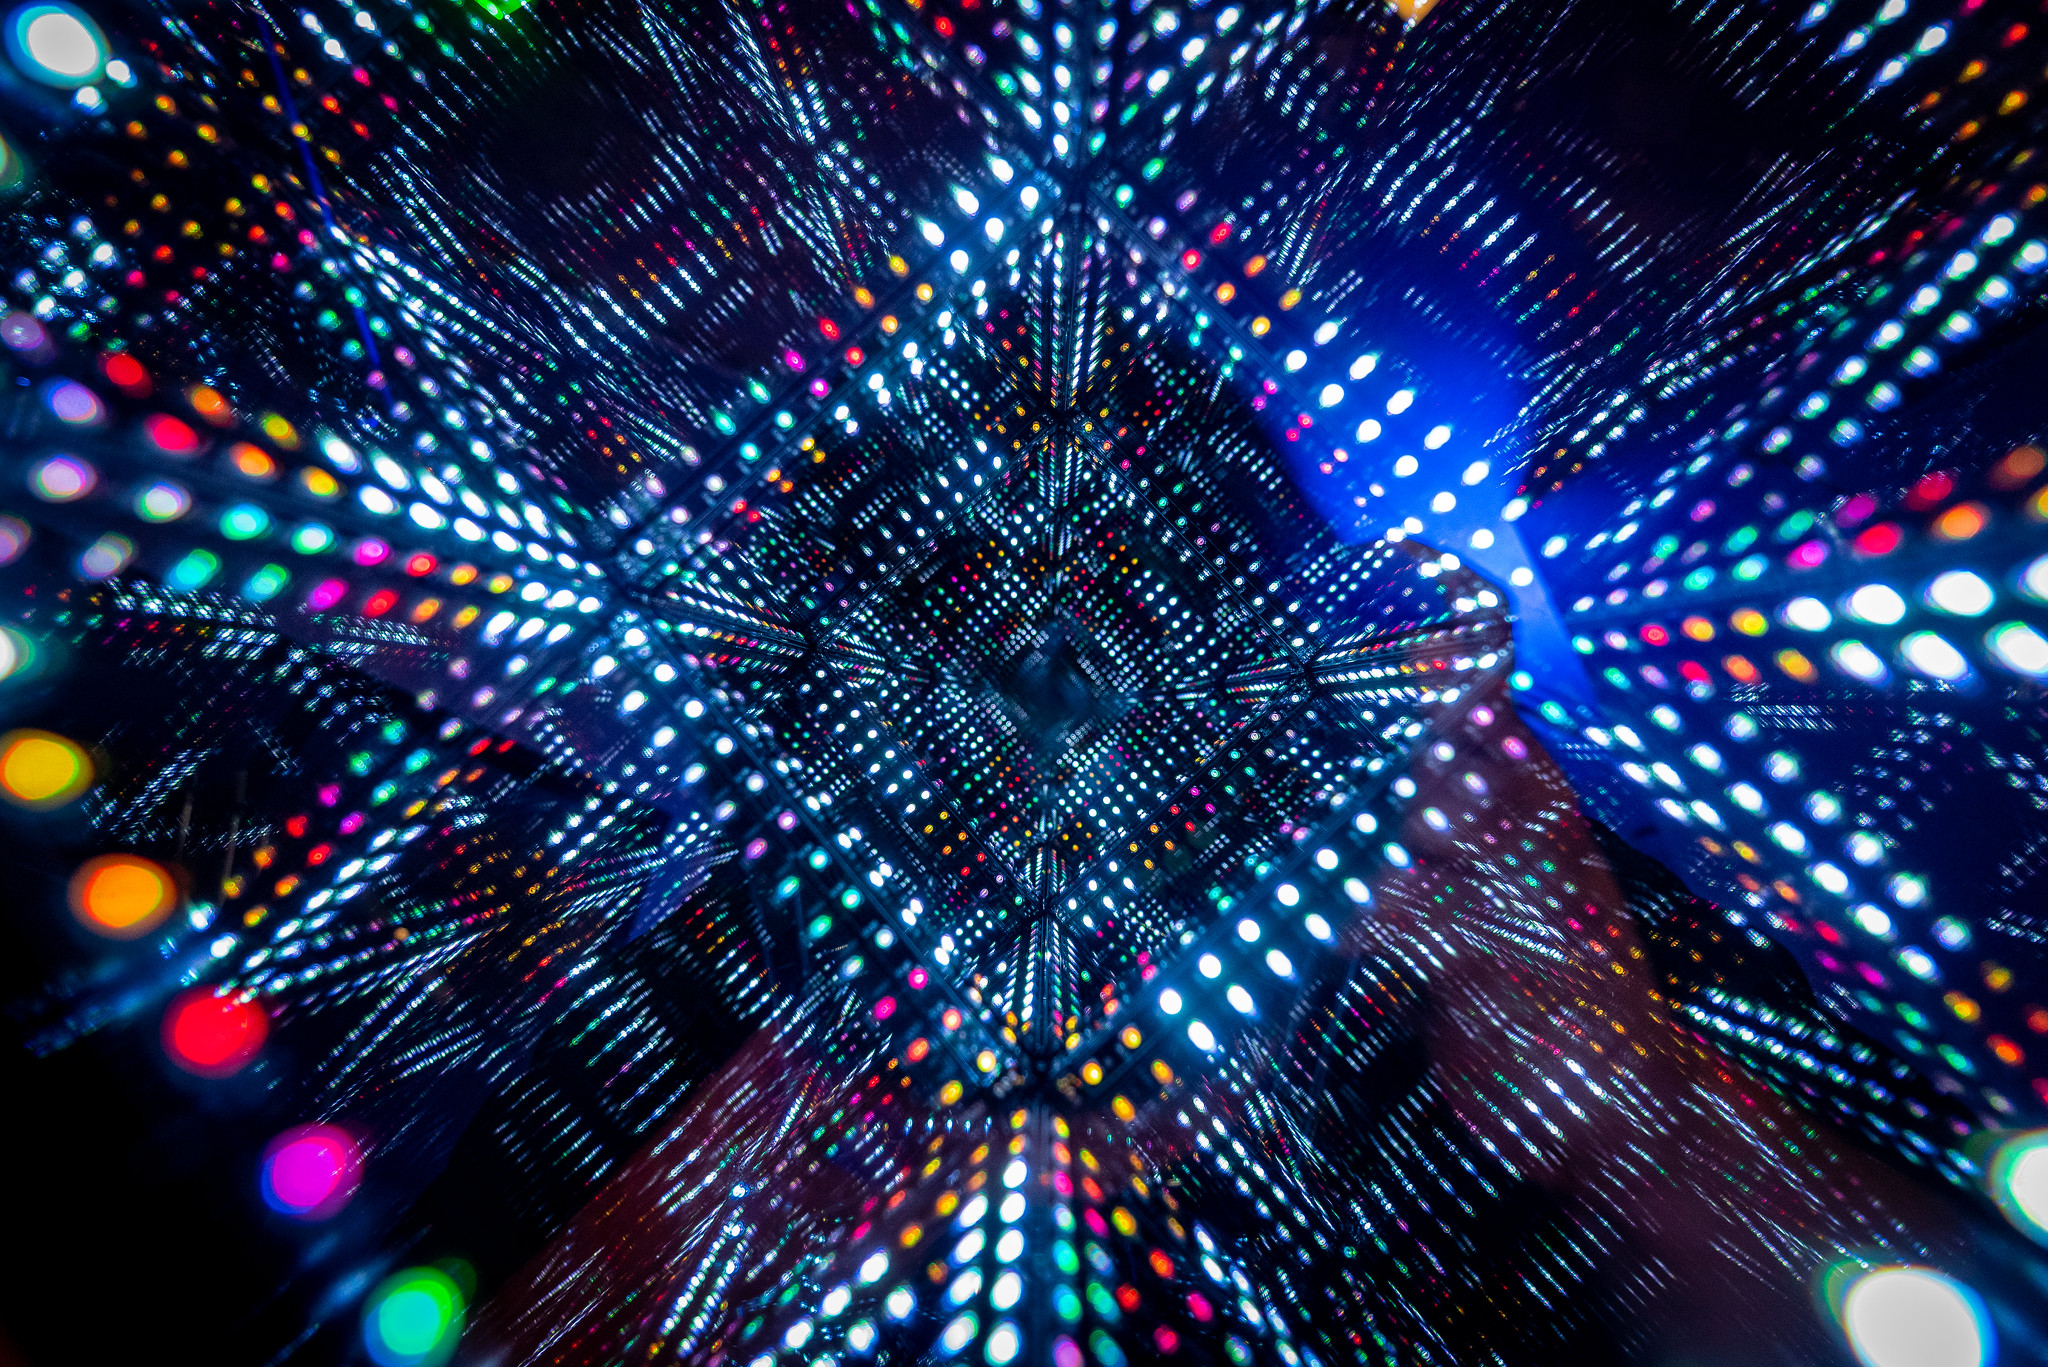 Abstract LED lights